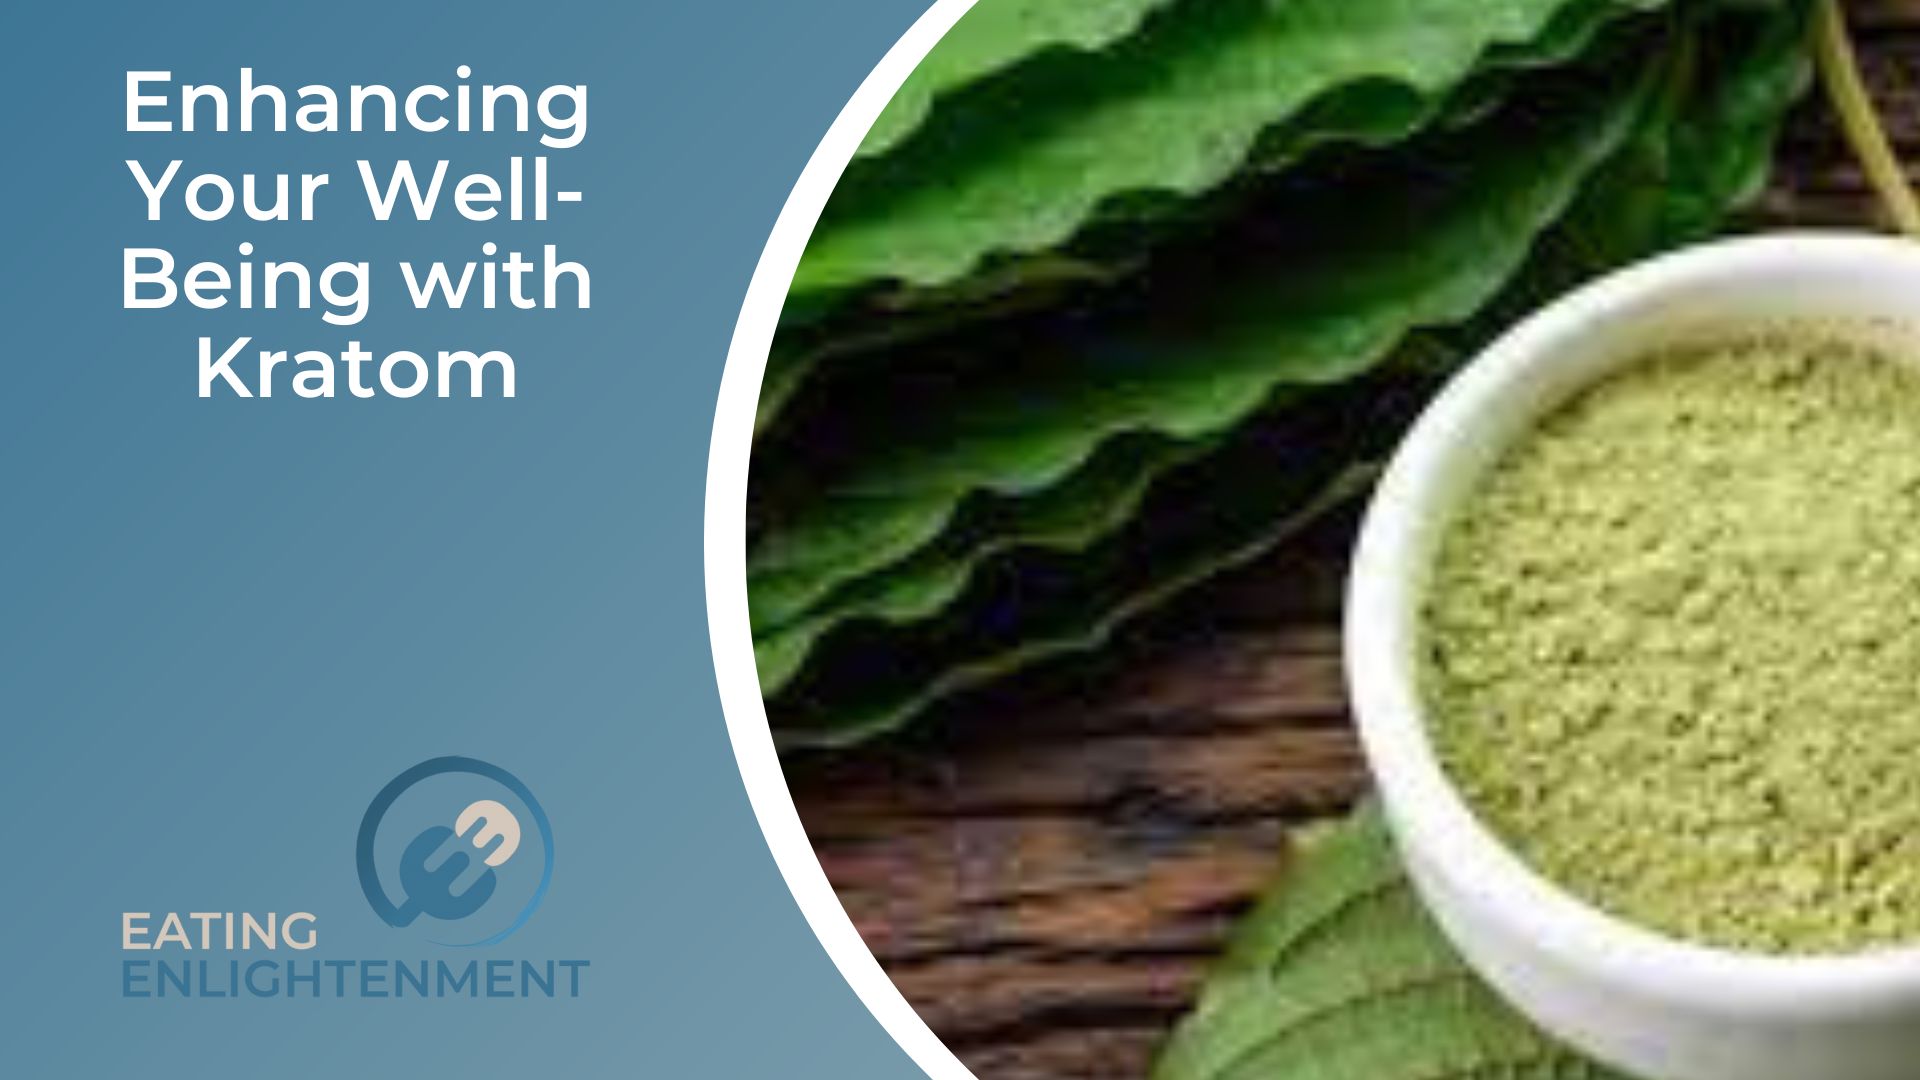 Enhancing Your Well-Being with Kratom